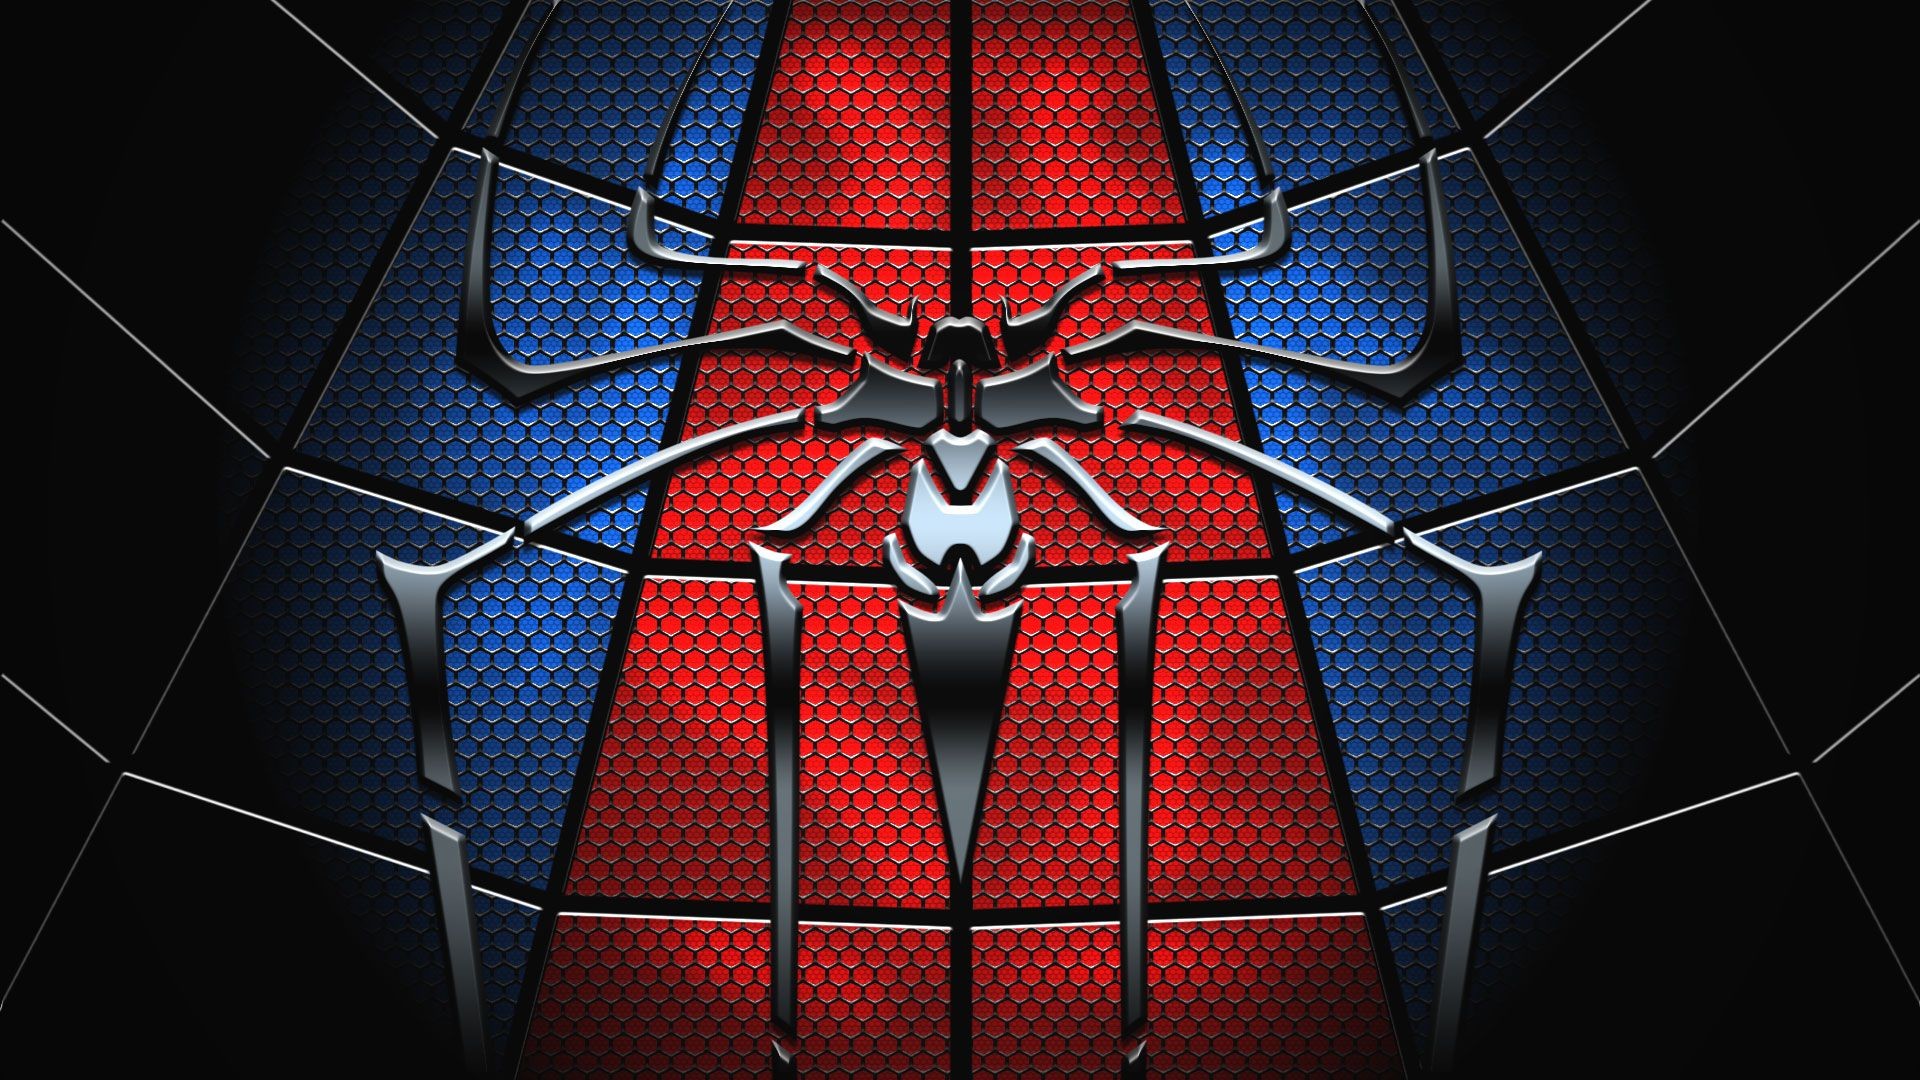 1920x1080 Spiderman Logo Widescreen Wallpapers 239 - HD Wallpapers Site